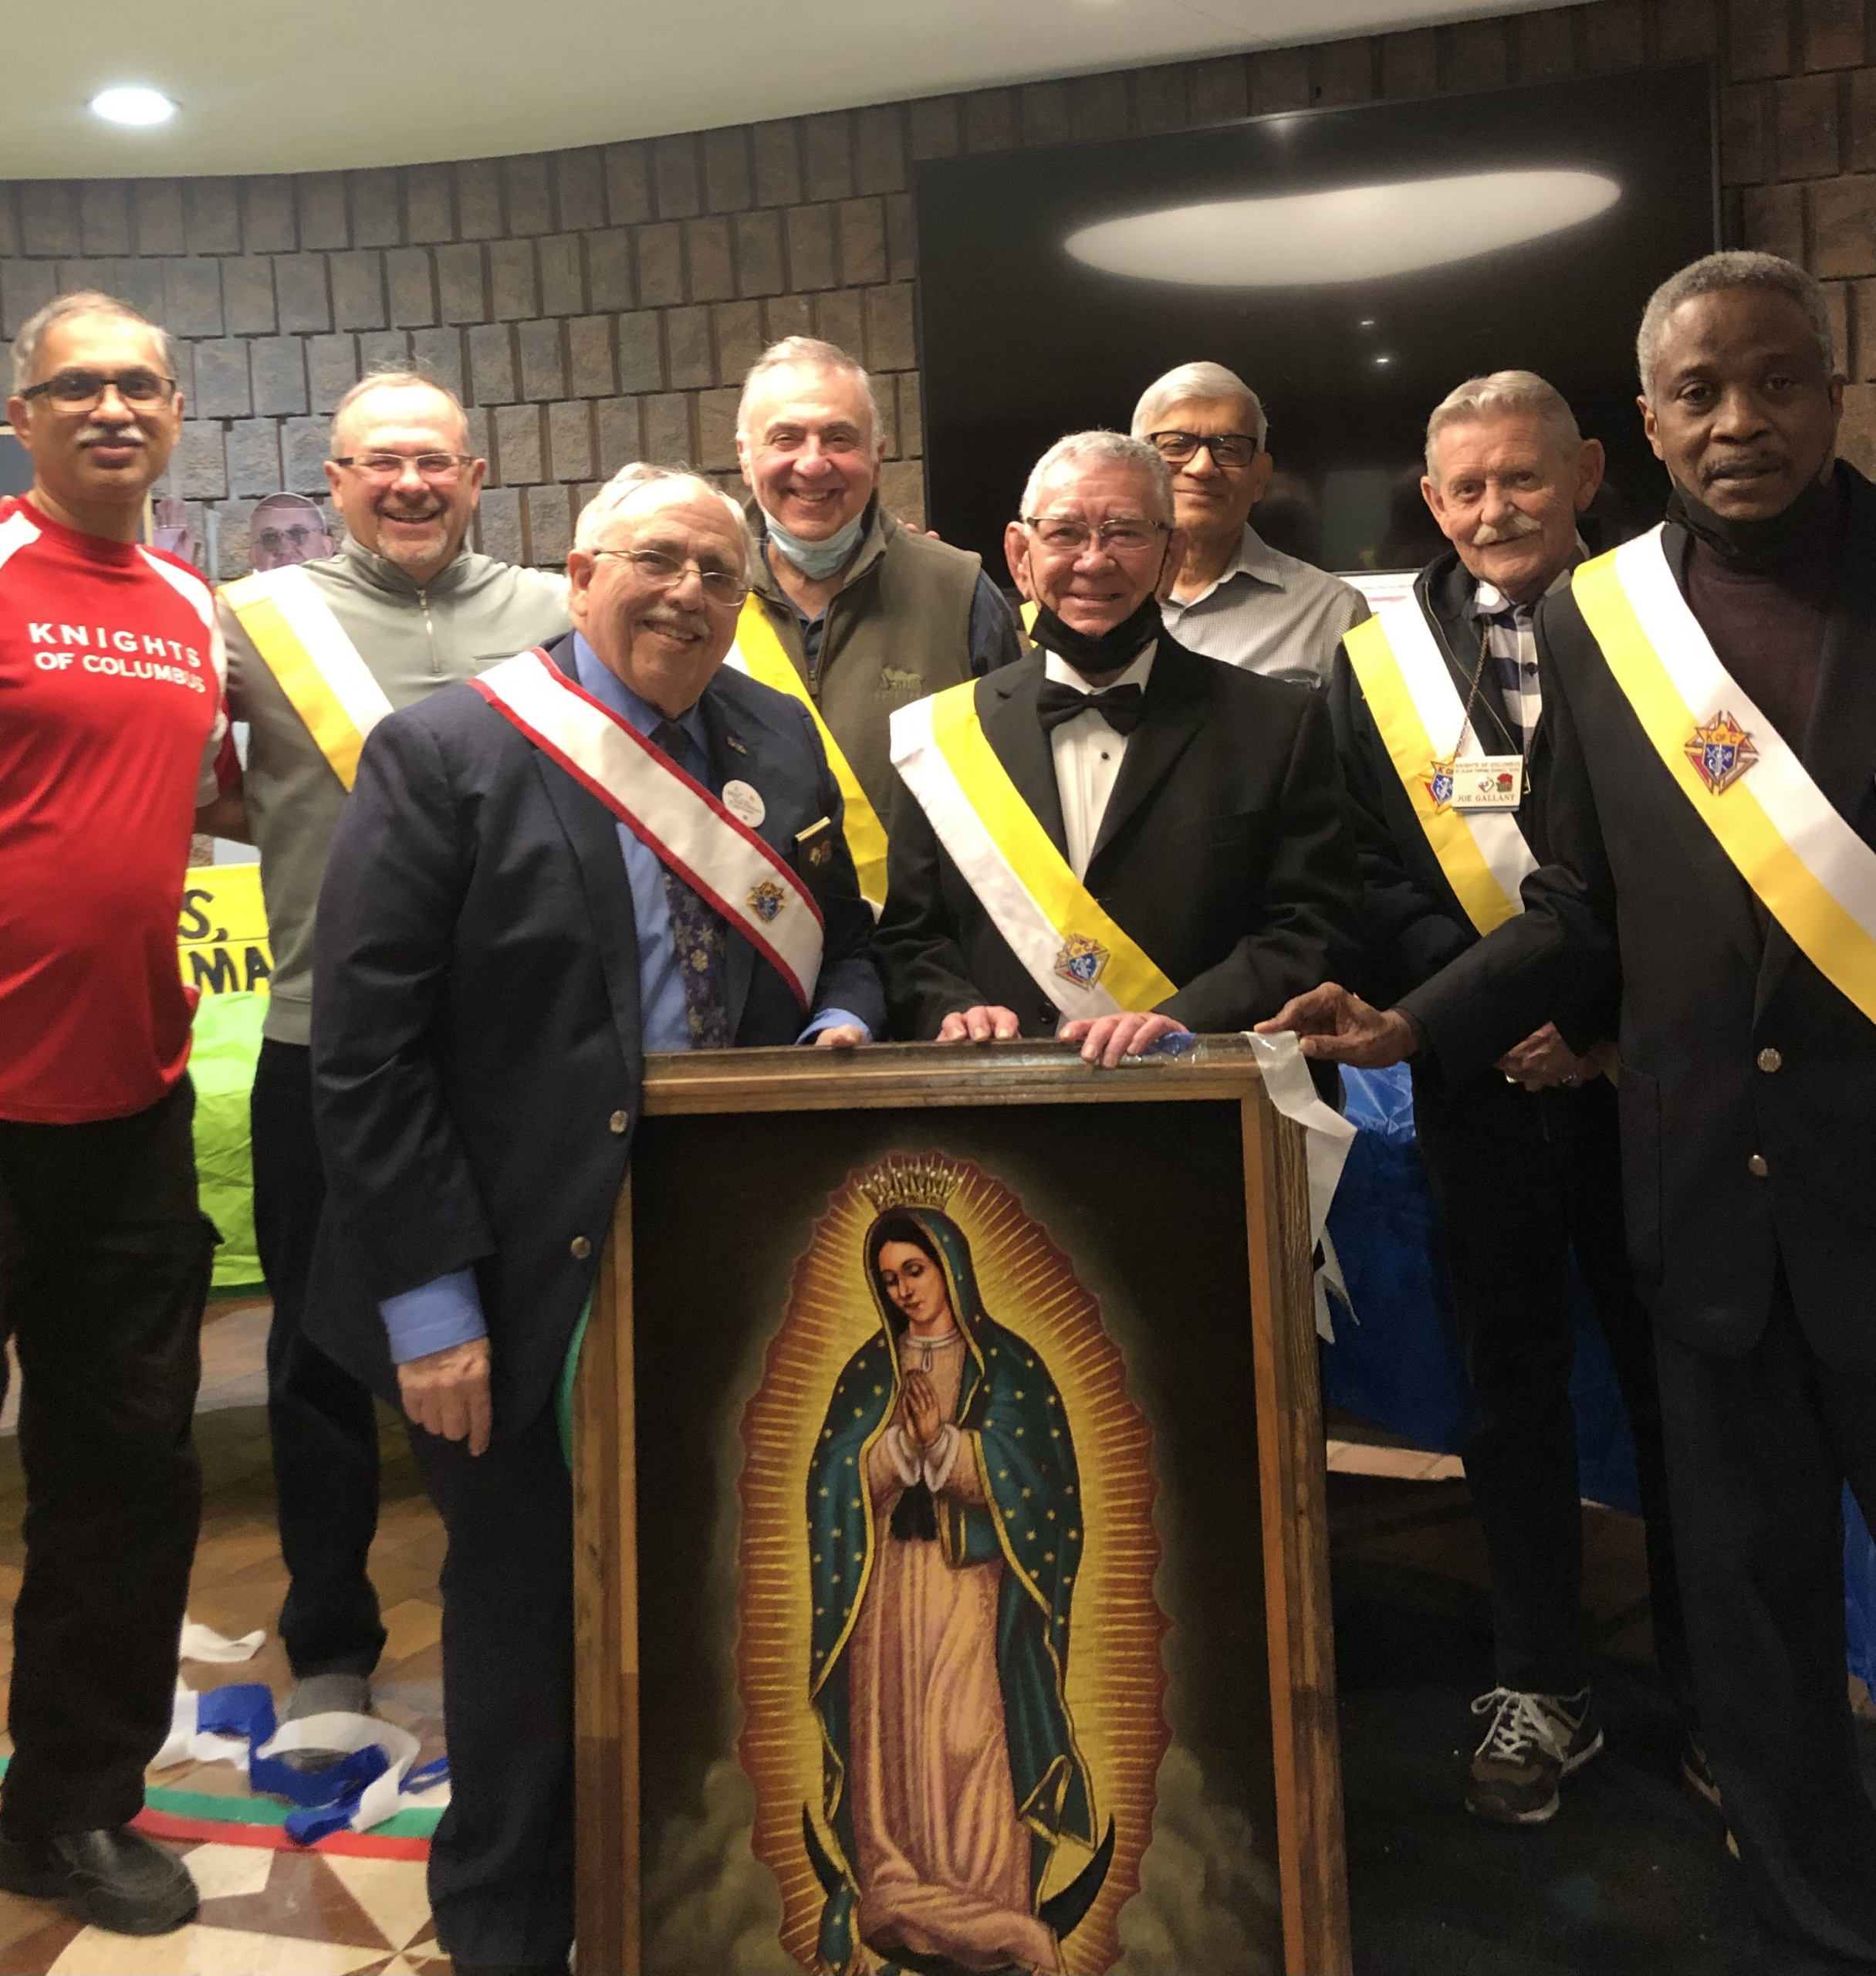 KofC Council9235 mass and devotion to our Lady of Guadalupe